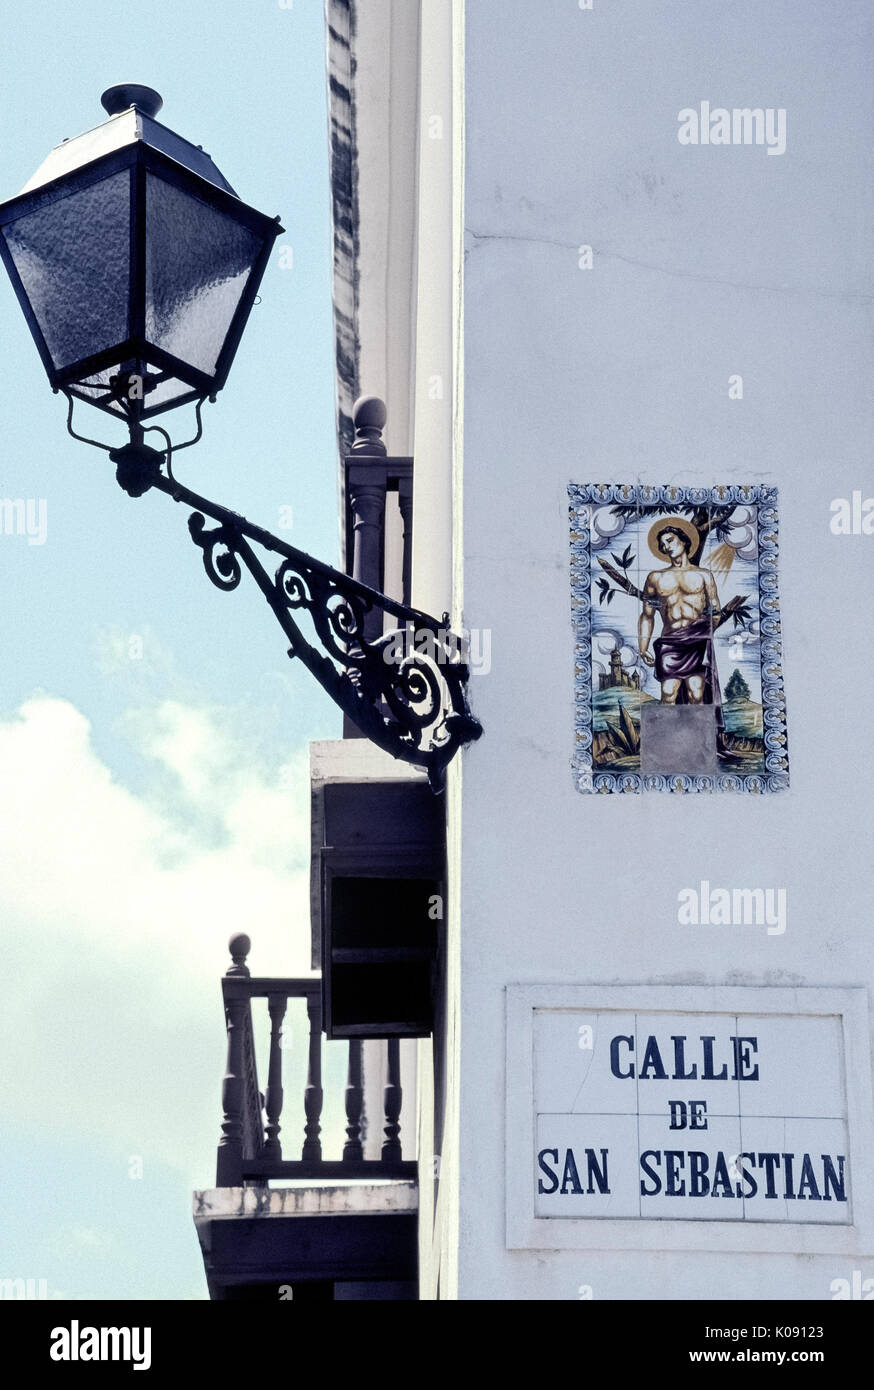 A religious artwork of ceramic tiles marks Calle de San Sebastian, a street named after early Christian martyr Saint Sebastian in historic Old San Juan in Puerto Rico (PR), an unincorporated territory of the United States in the Caribbean Sea. One of the tiles showing the saint's lower legs is missing. A vintage wrought iron street light illuminates the street name and illustrated sign at night. Stock Photo